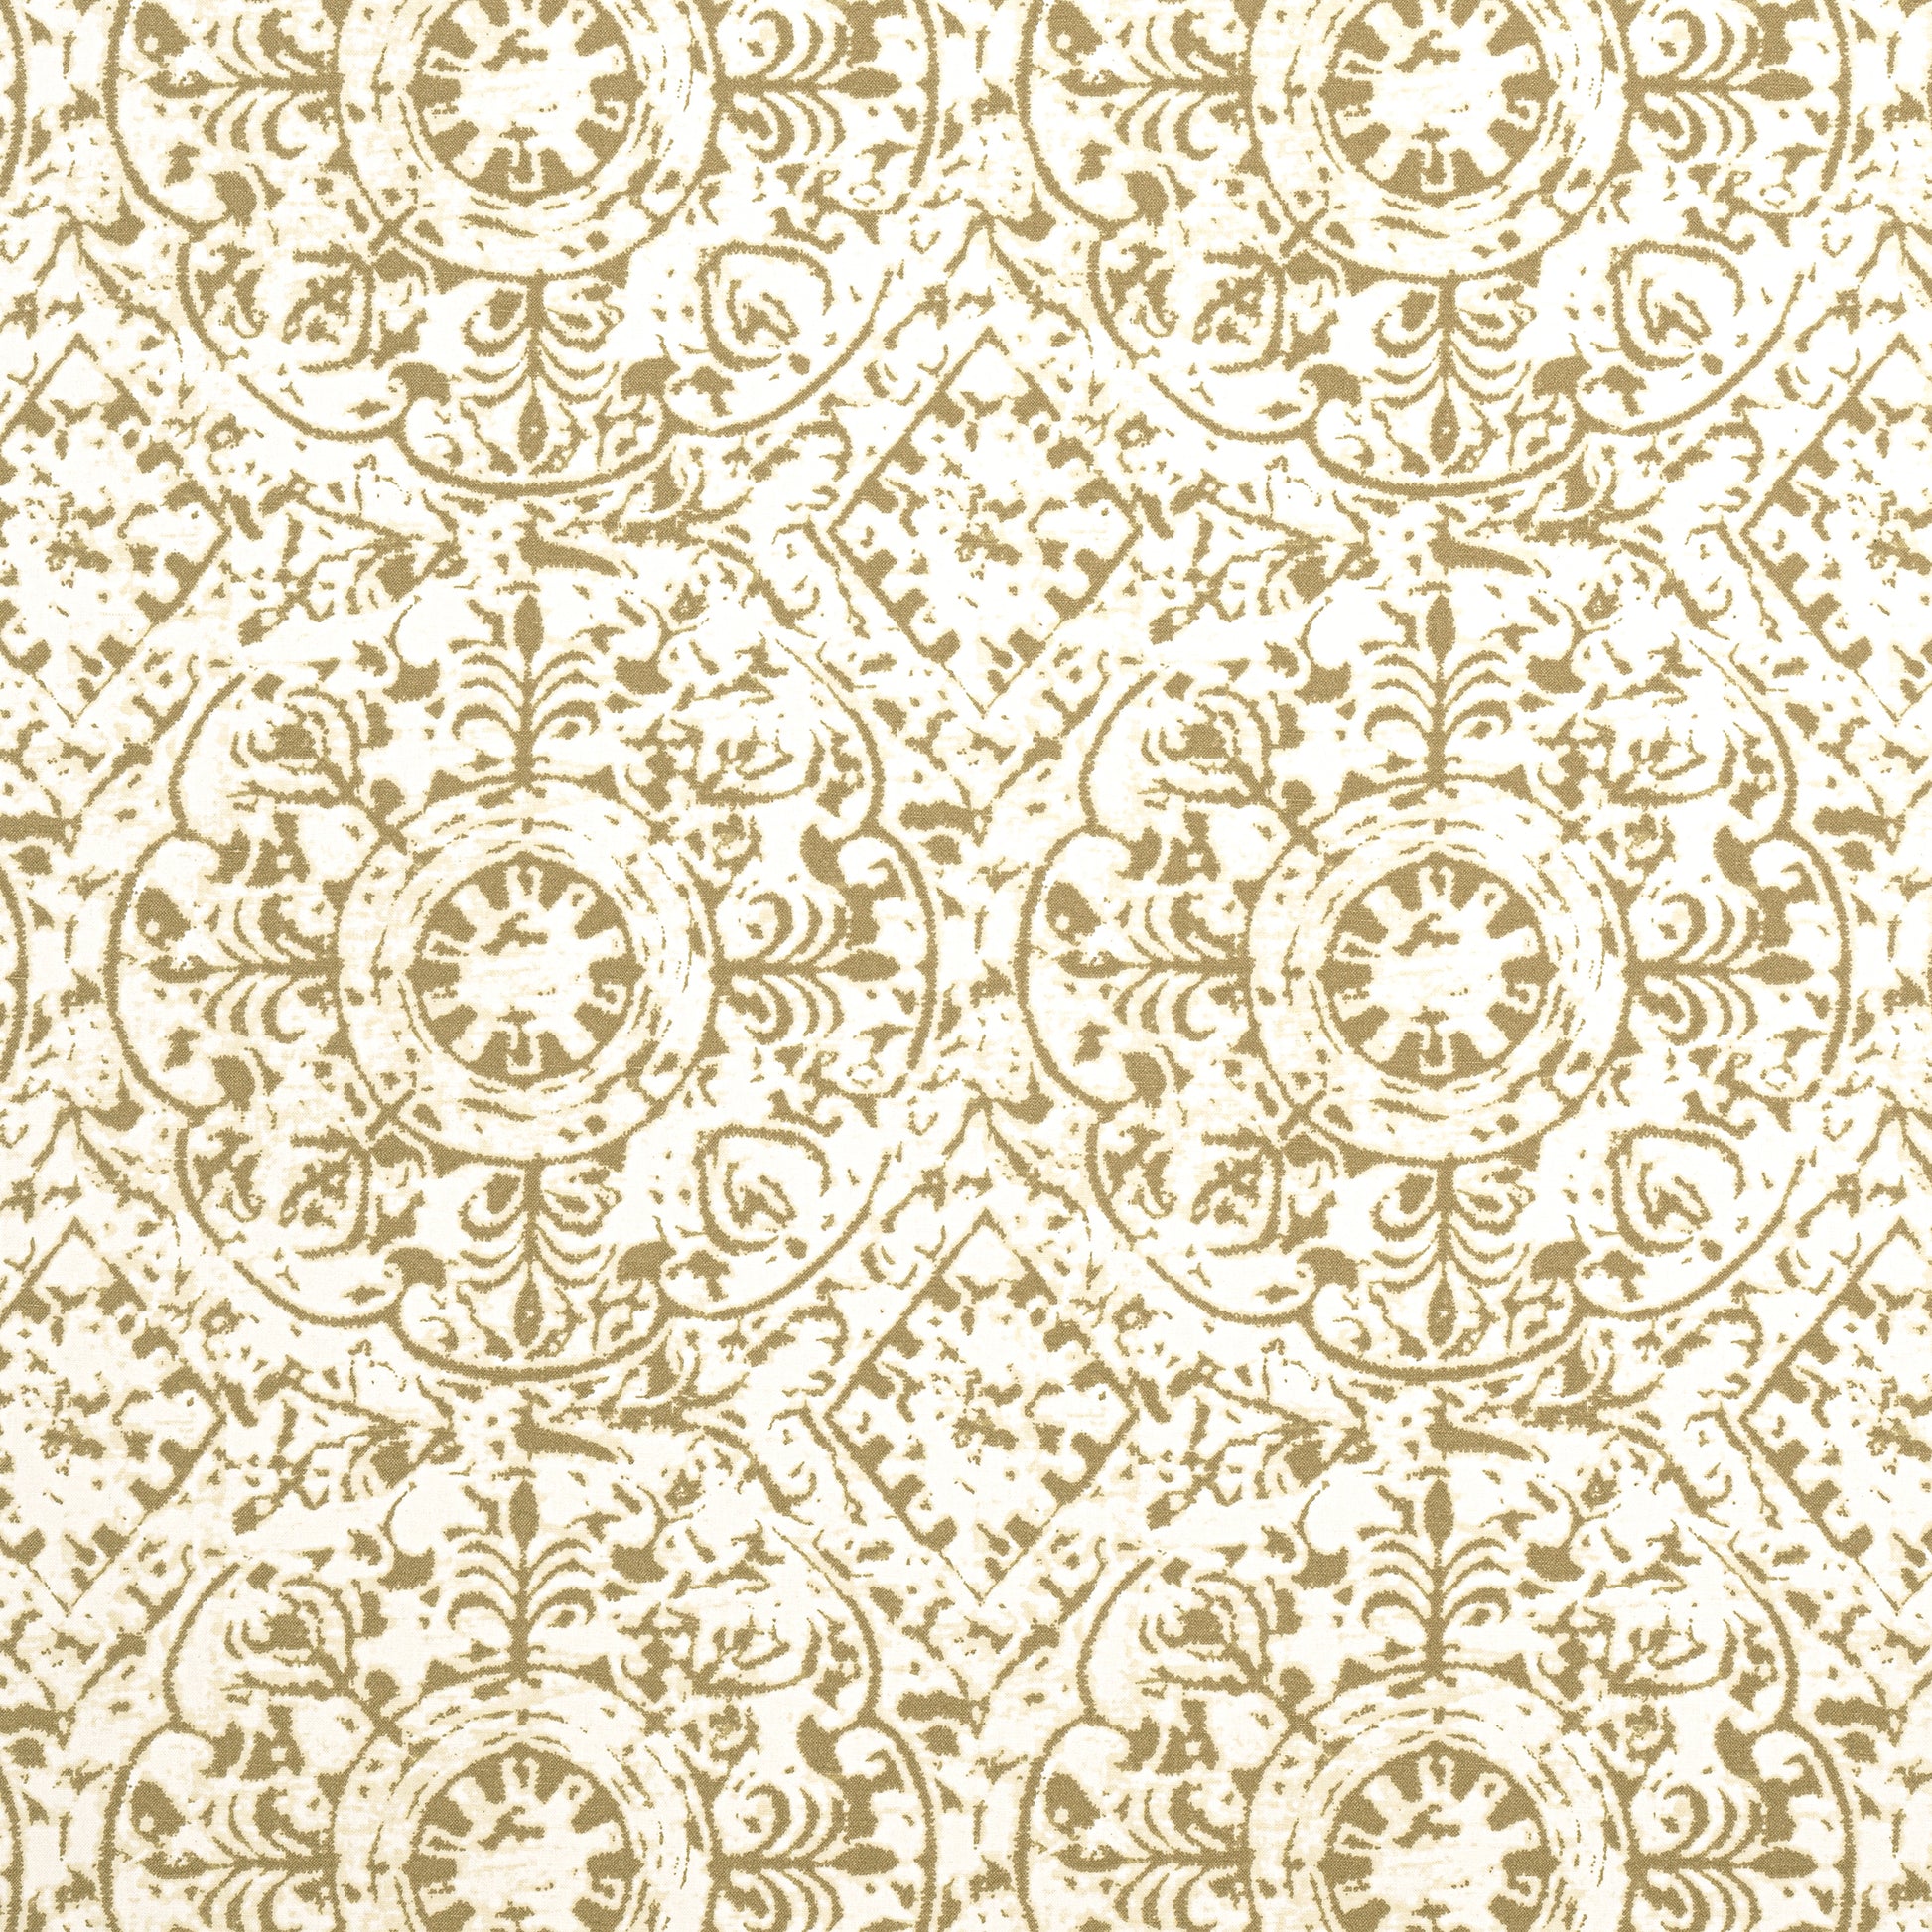 Purchase Thibaut Fabric Product# F981313 pattern name Havana color Camel